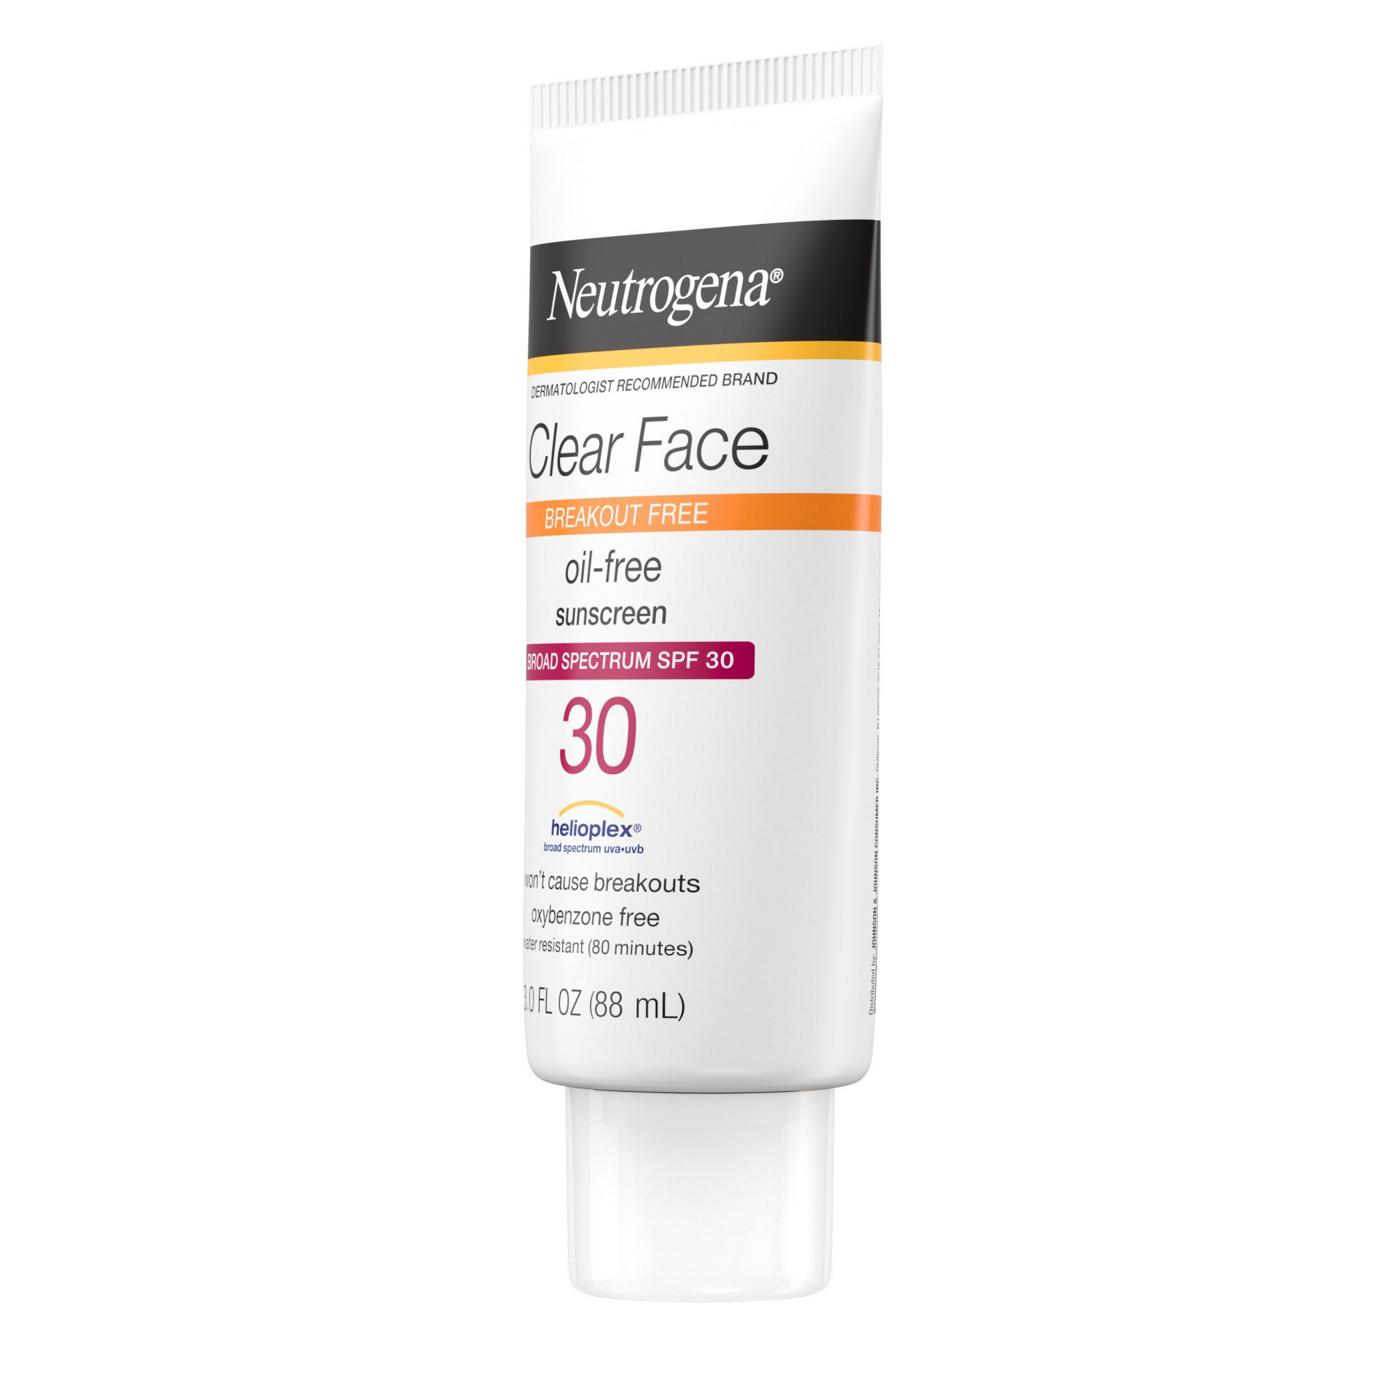 Neutrogena Clear Face Oil-Free Sunscreen SPF 30; image 3 of 8